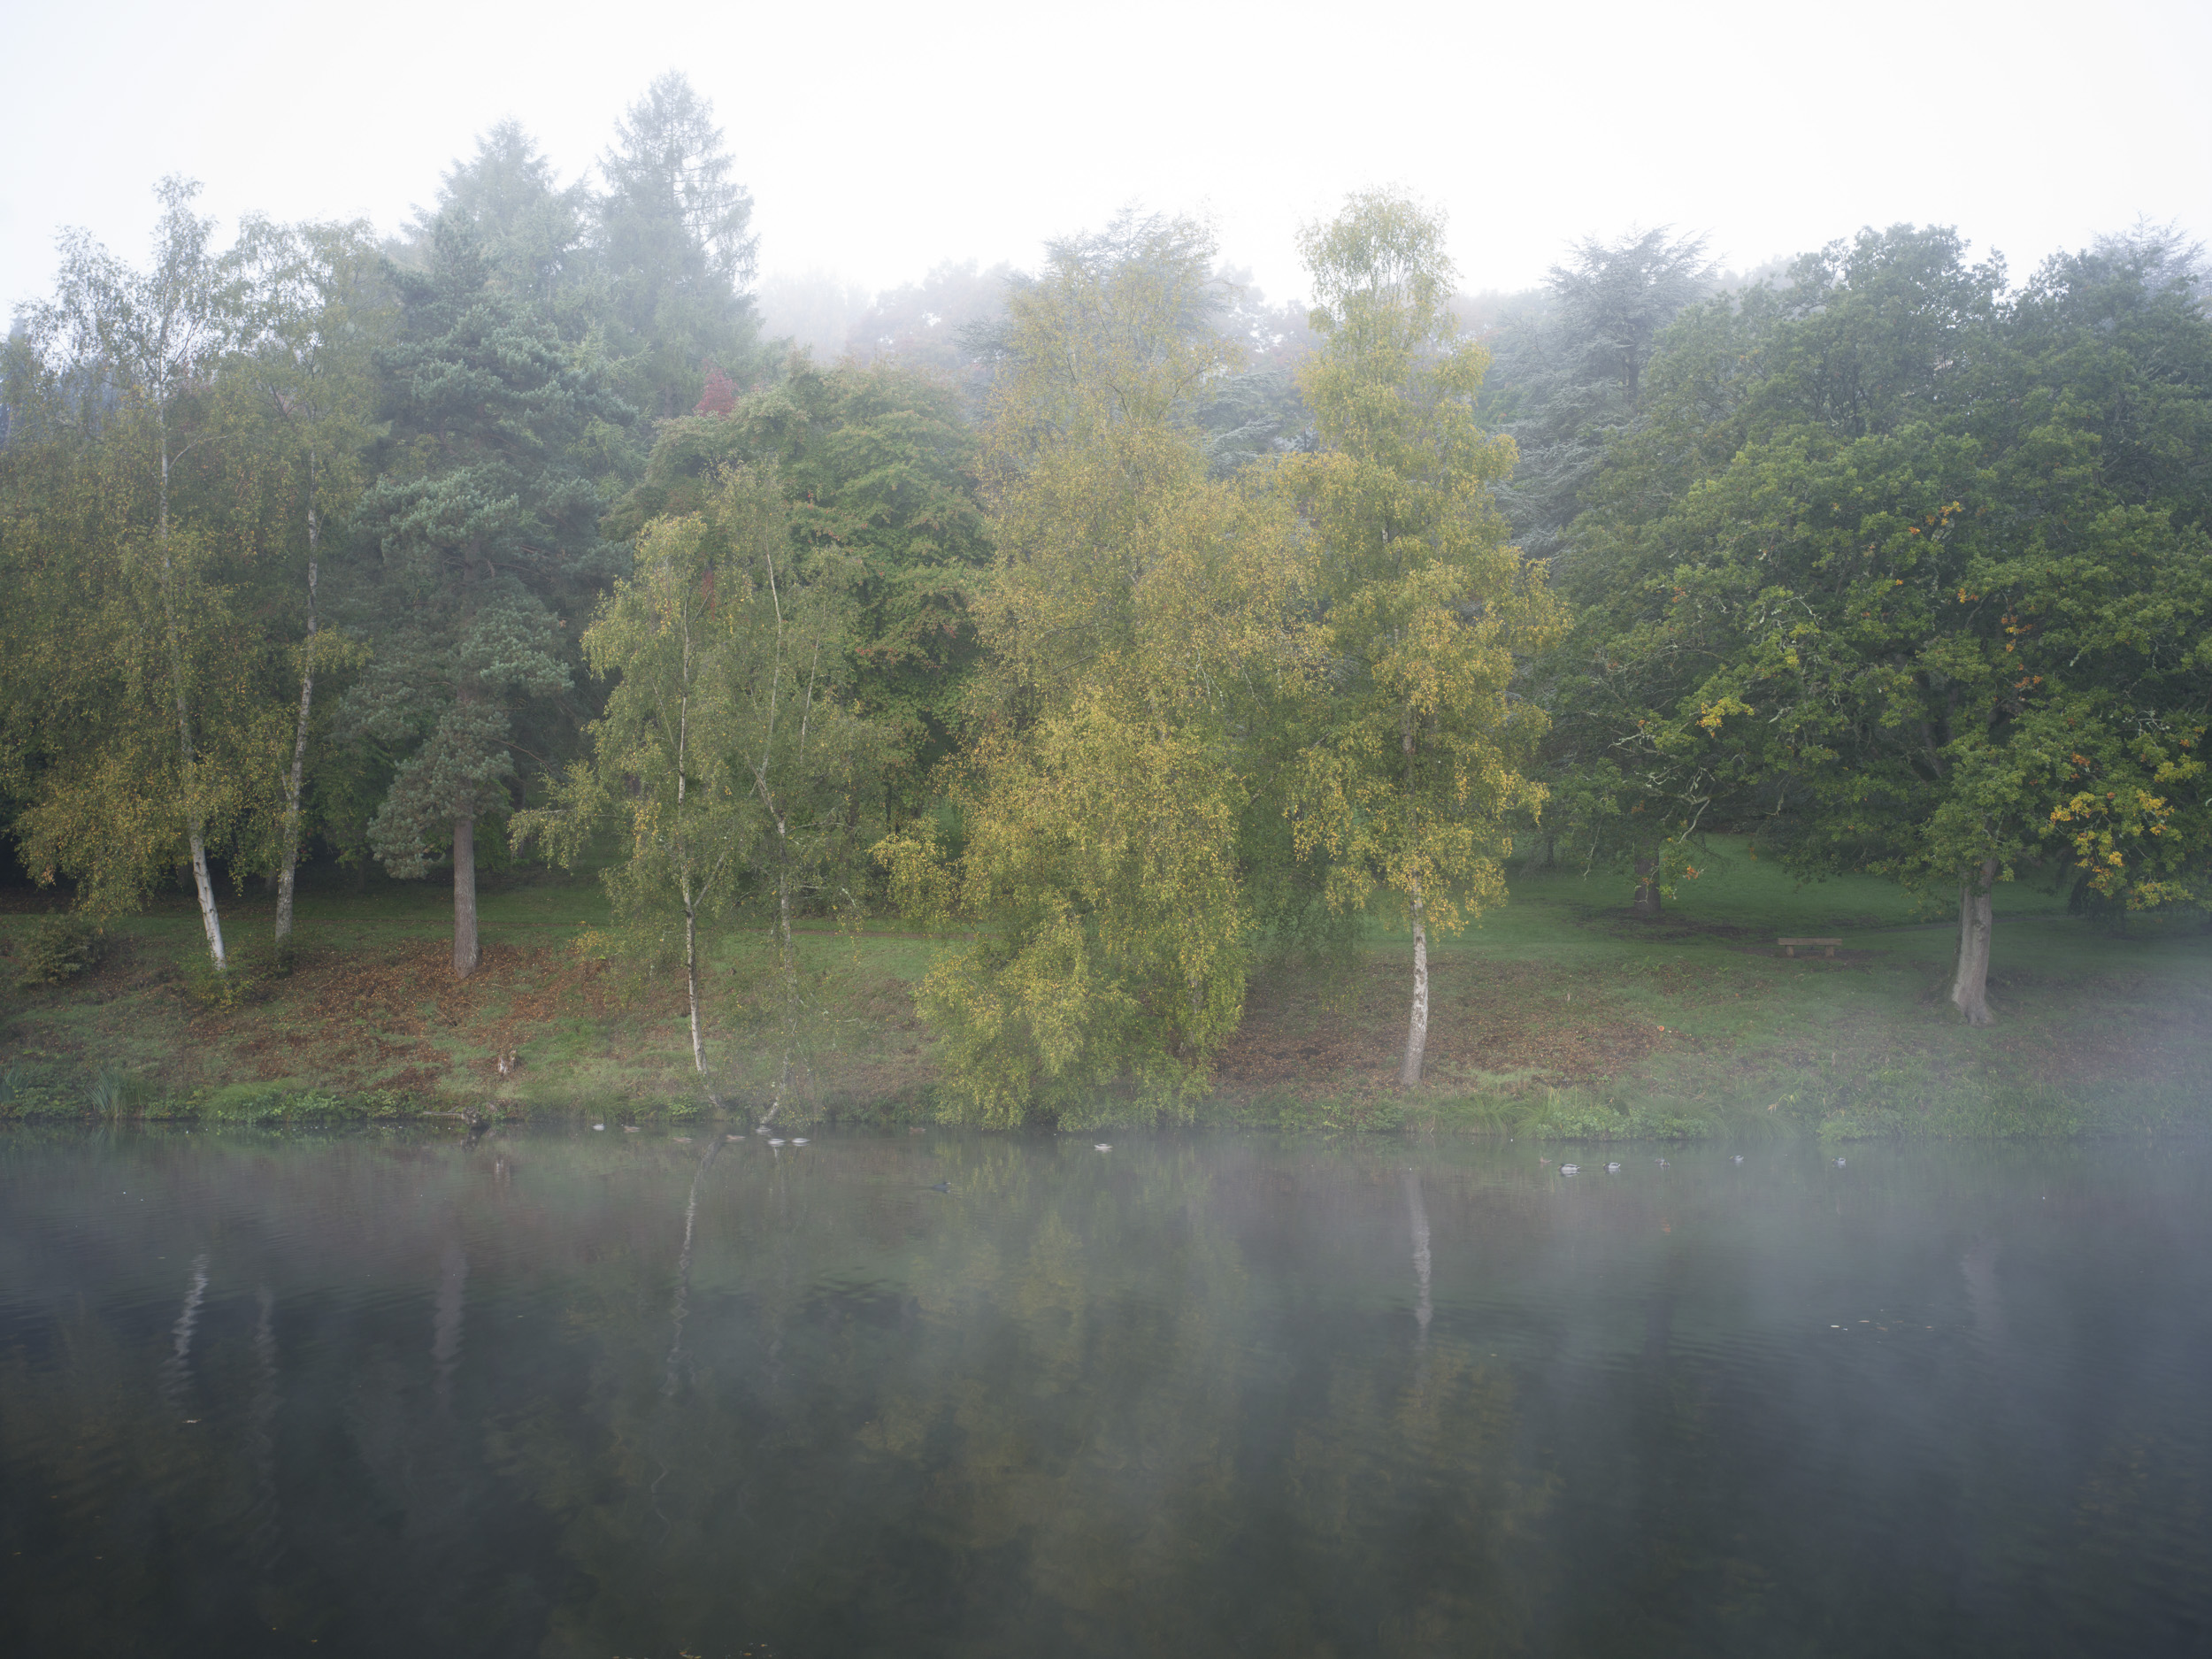 Sample image taken with the Hasselblad X2D 100C of a misty forest reflected in a lak